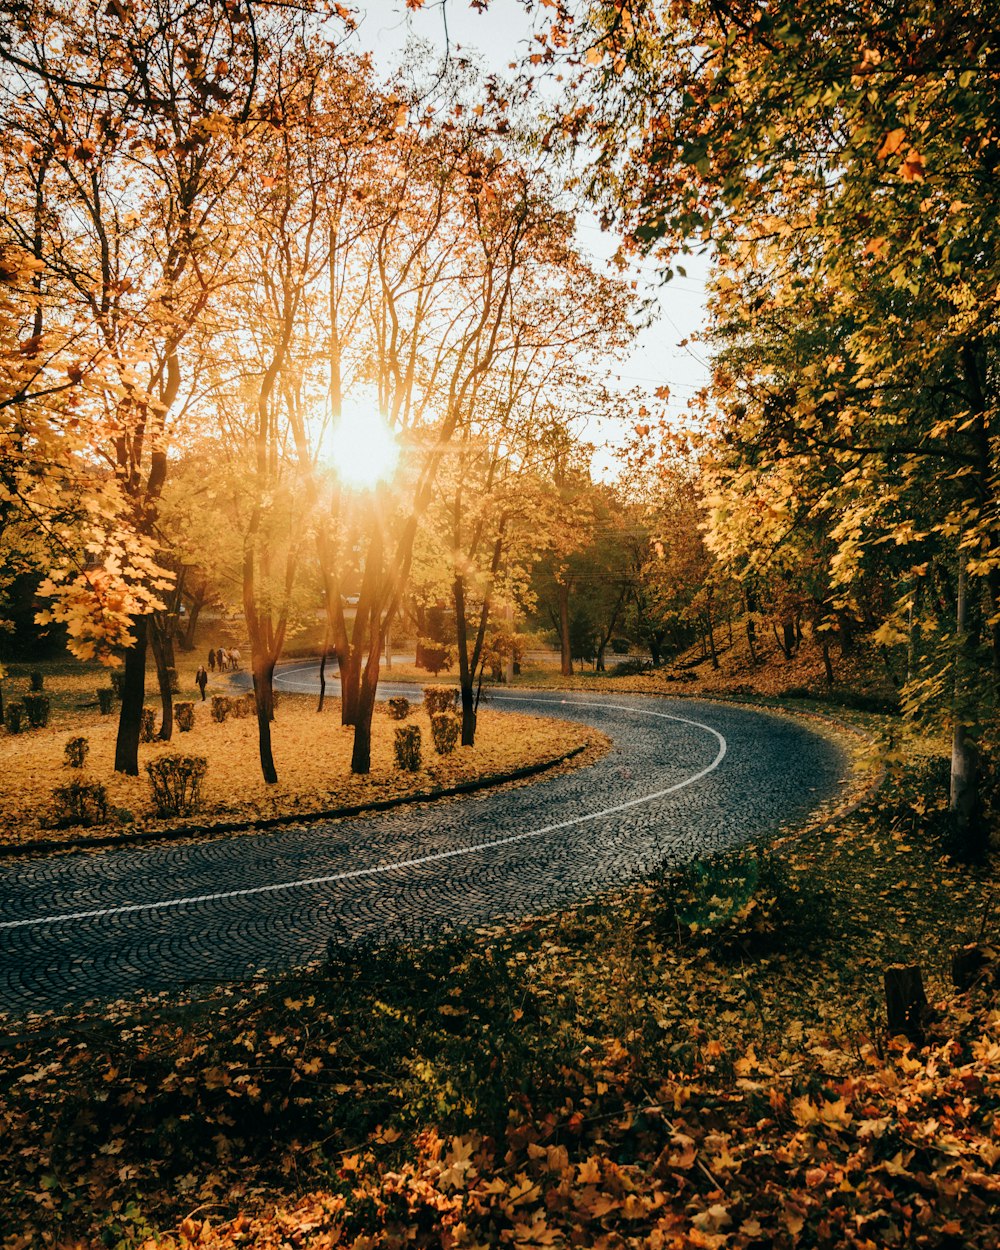 a winding road surrounded by trees and leaves